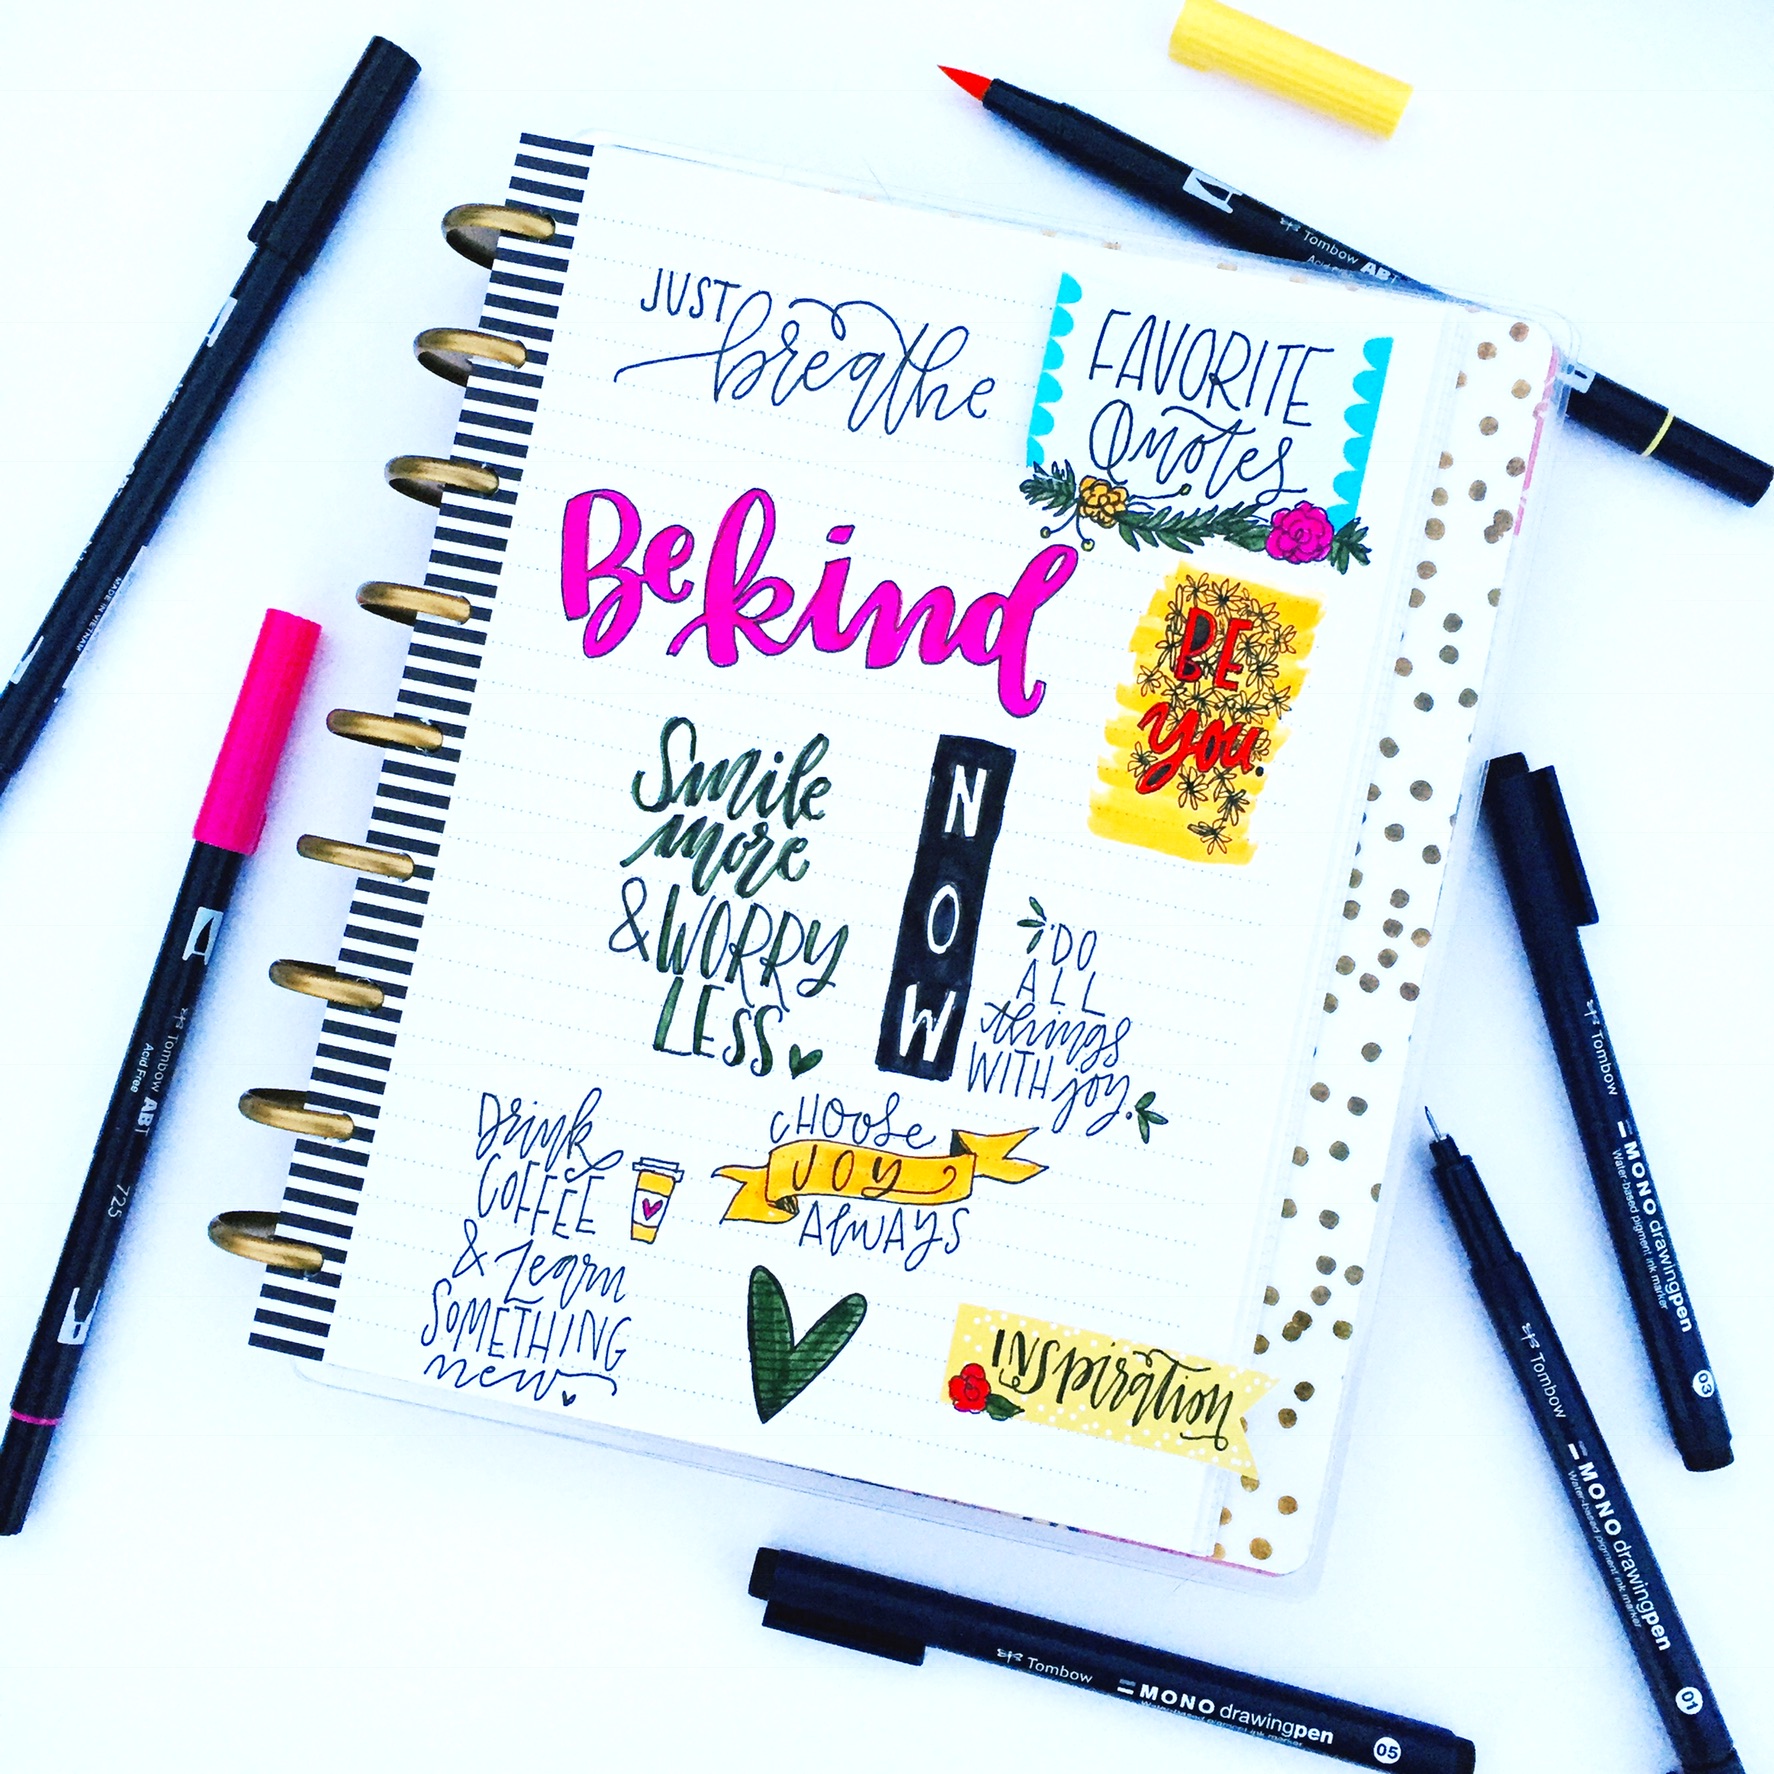 Learn lettering tips and tricks from Lauren Fitzmaurice of @renmadecalligraphy using the new Tombow MONO Drawing Pens from tombowusa.com.